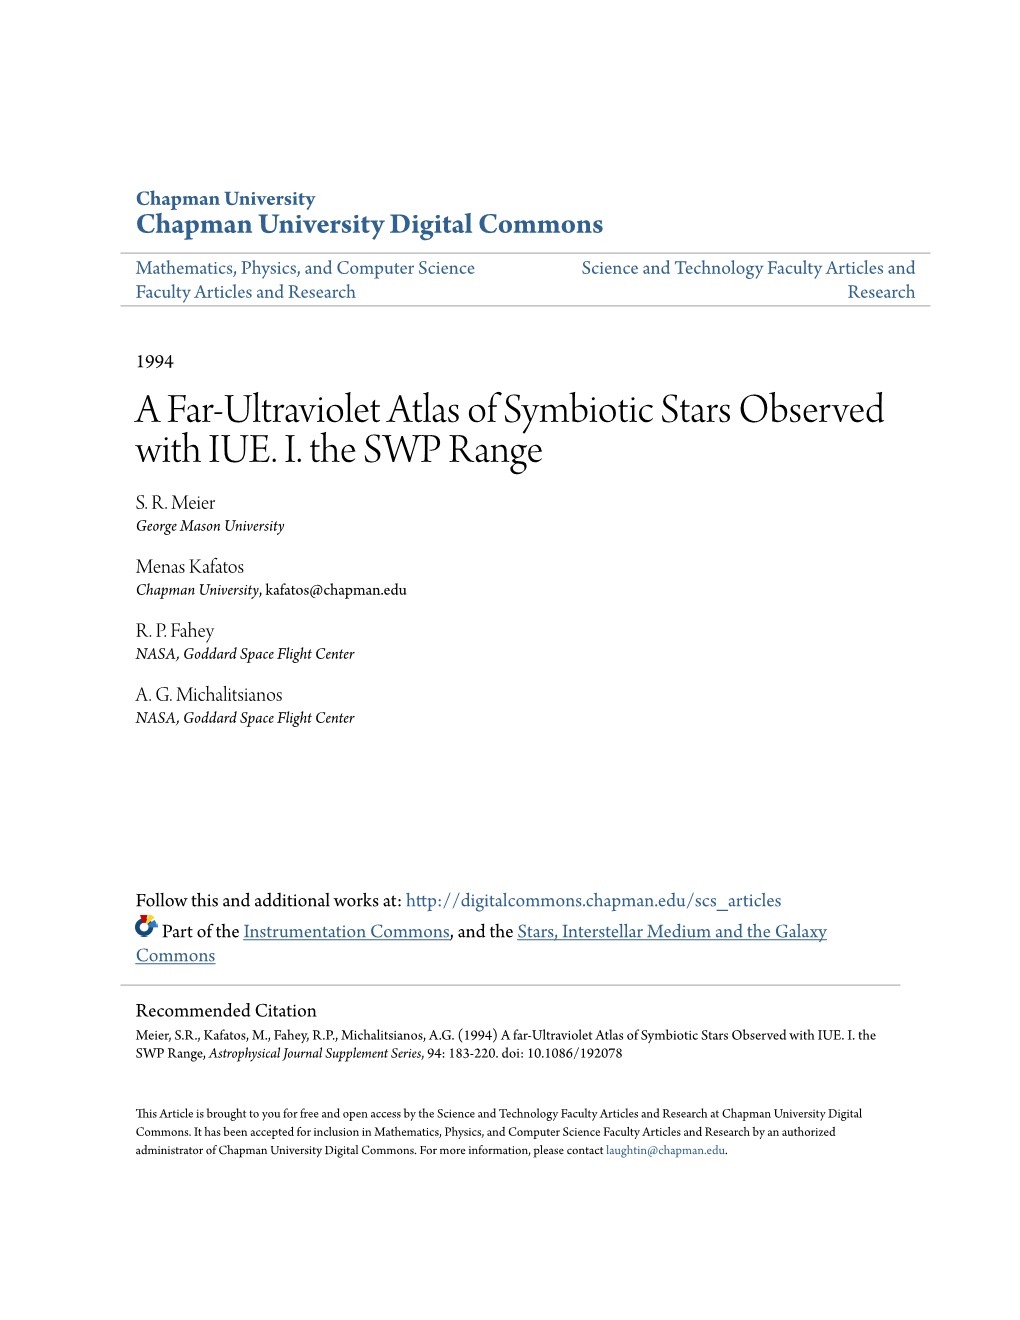 A Far-Ultraviolet Atlas of Symbiotic Stars Observed with IUE. I. the SWP Range S